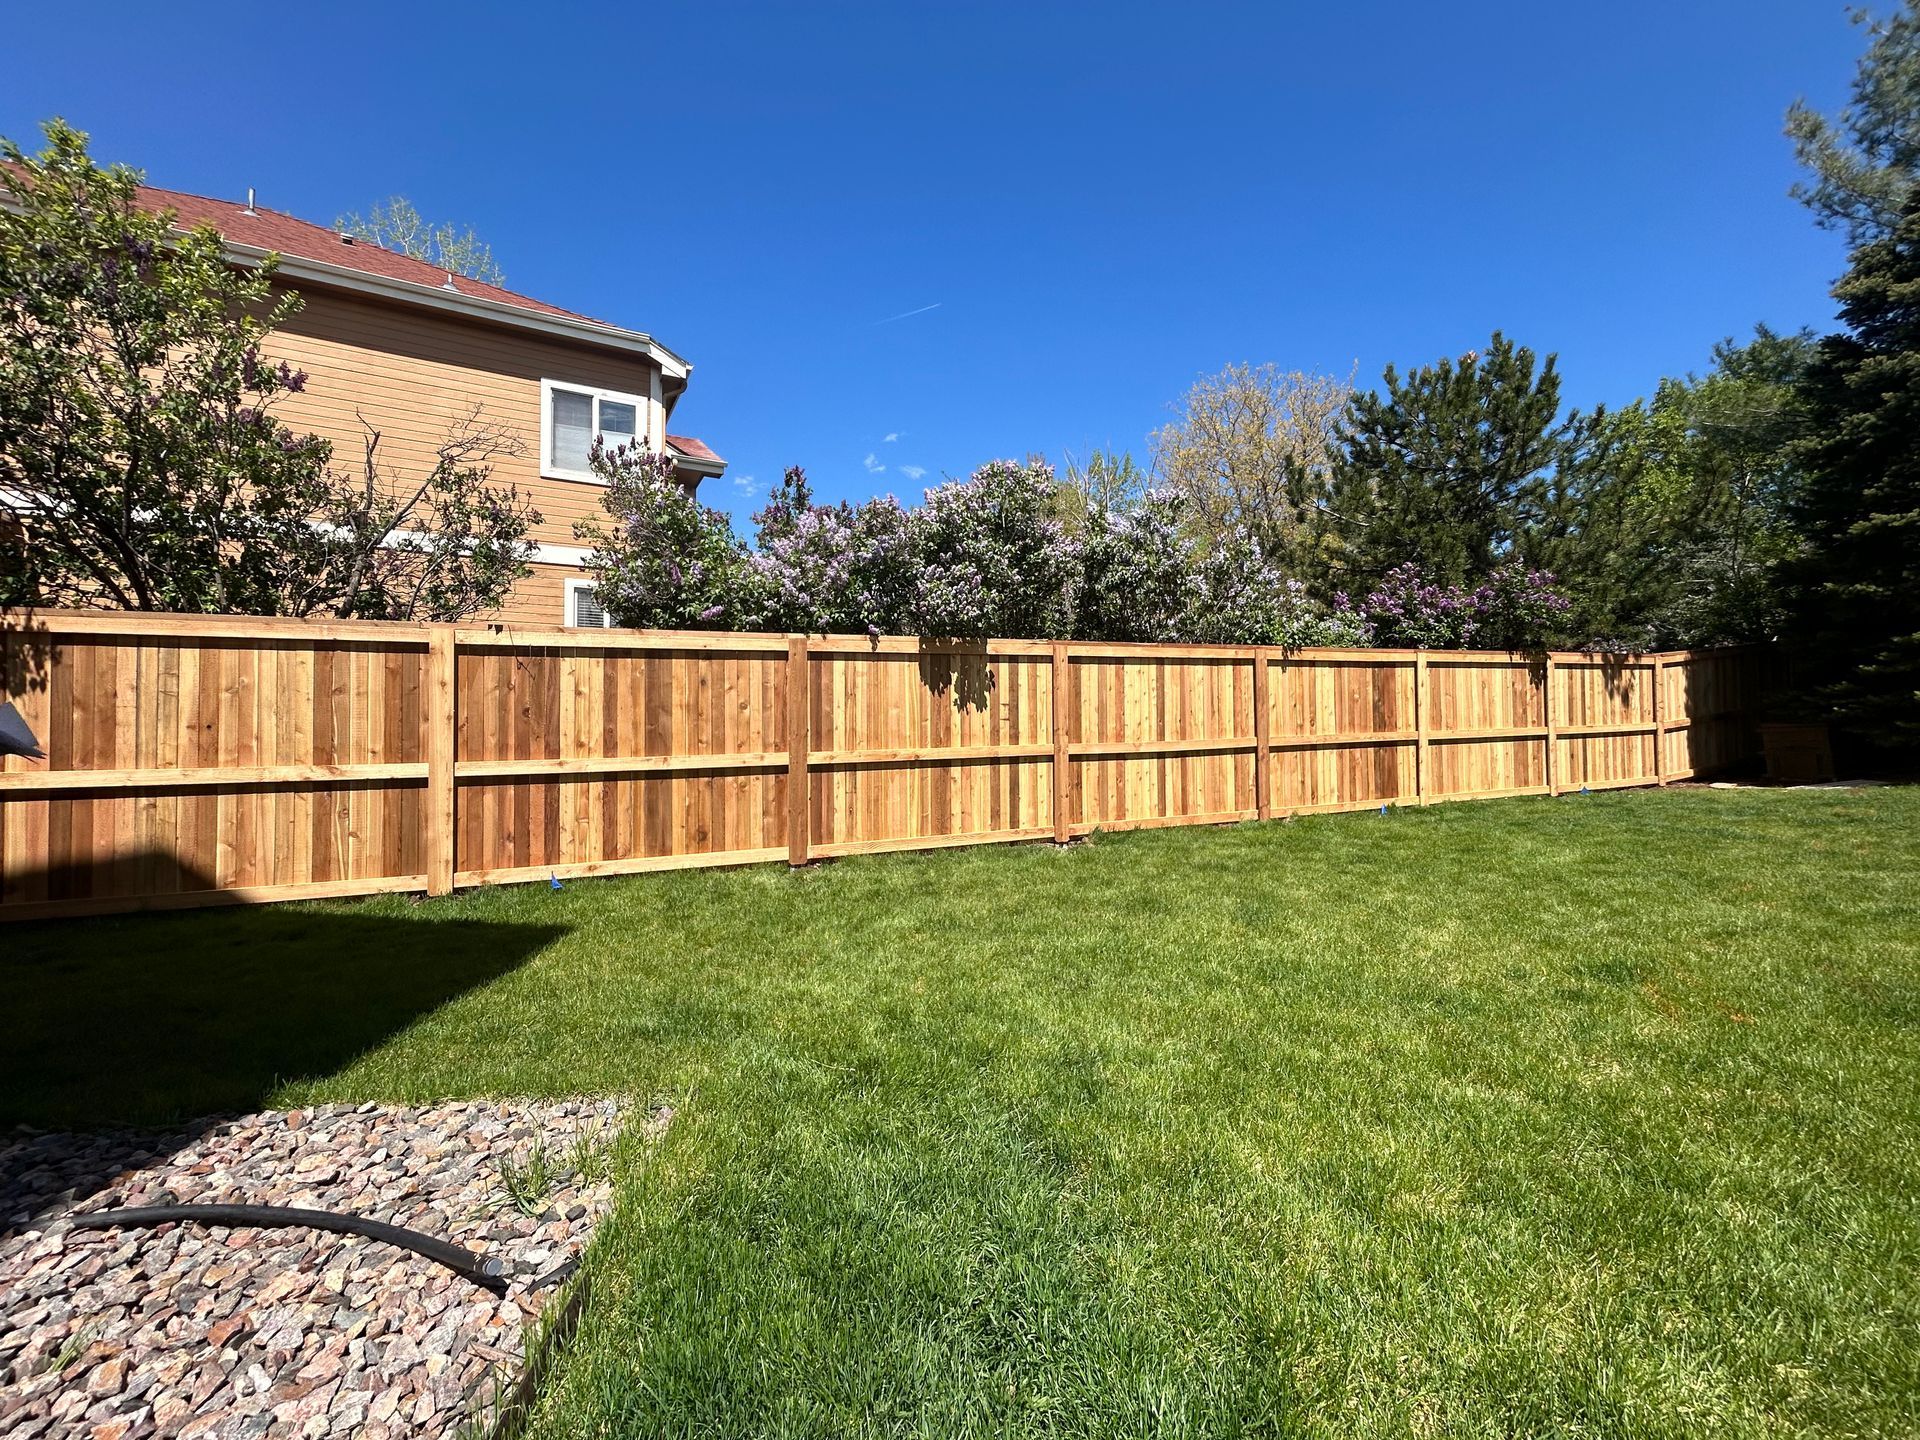 A wooden fence surrounds a lush green lawn in a backyard.